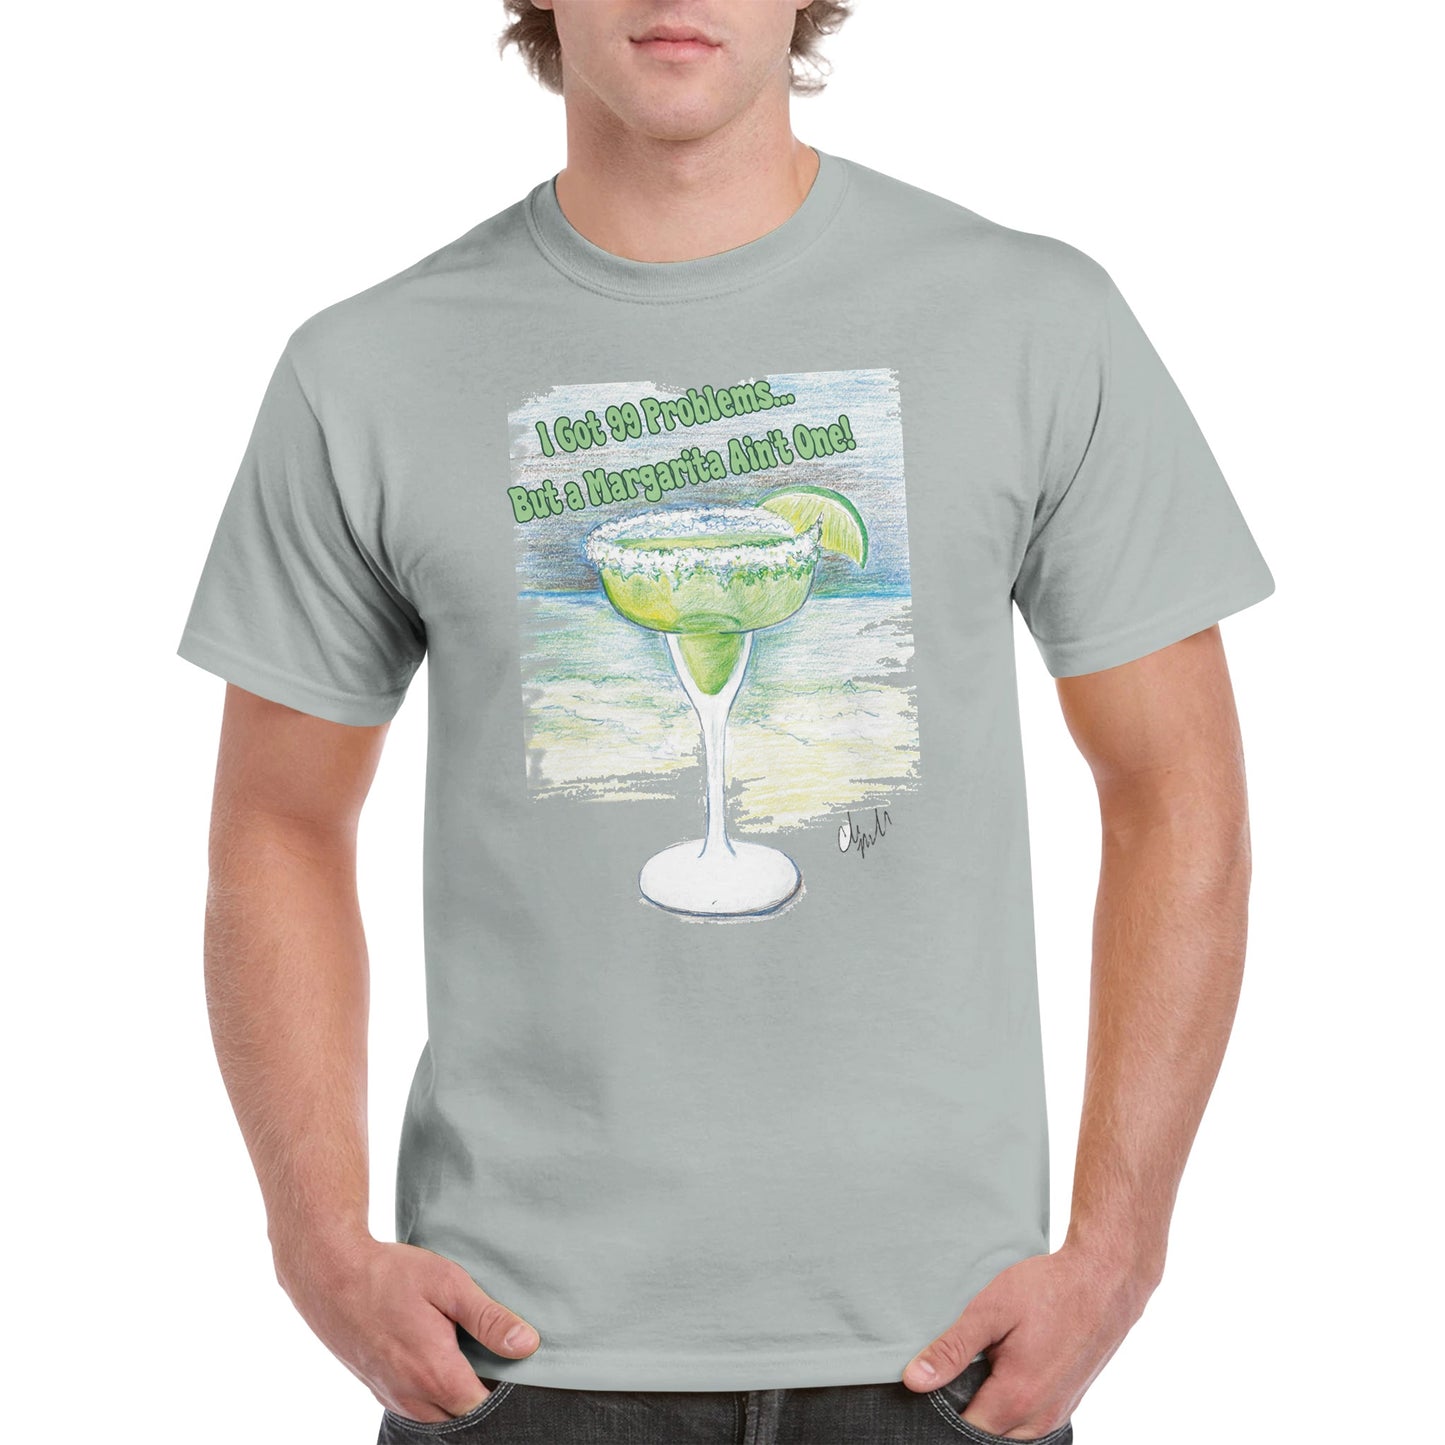 A ash heavyweight Unisex Crewneck cotton t-shirt with original artwork I Got 99 Problems… But A Margarita Ain’t One! on the front from WhatYa Say Apparel worn by blonde-haired male front view.